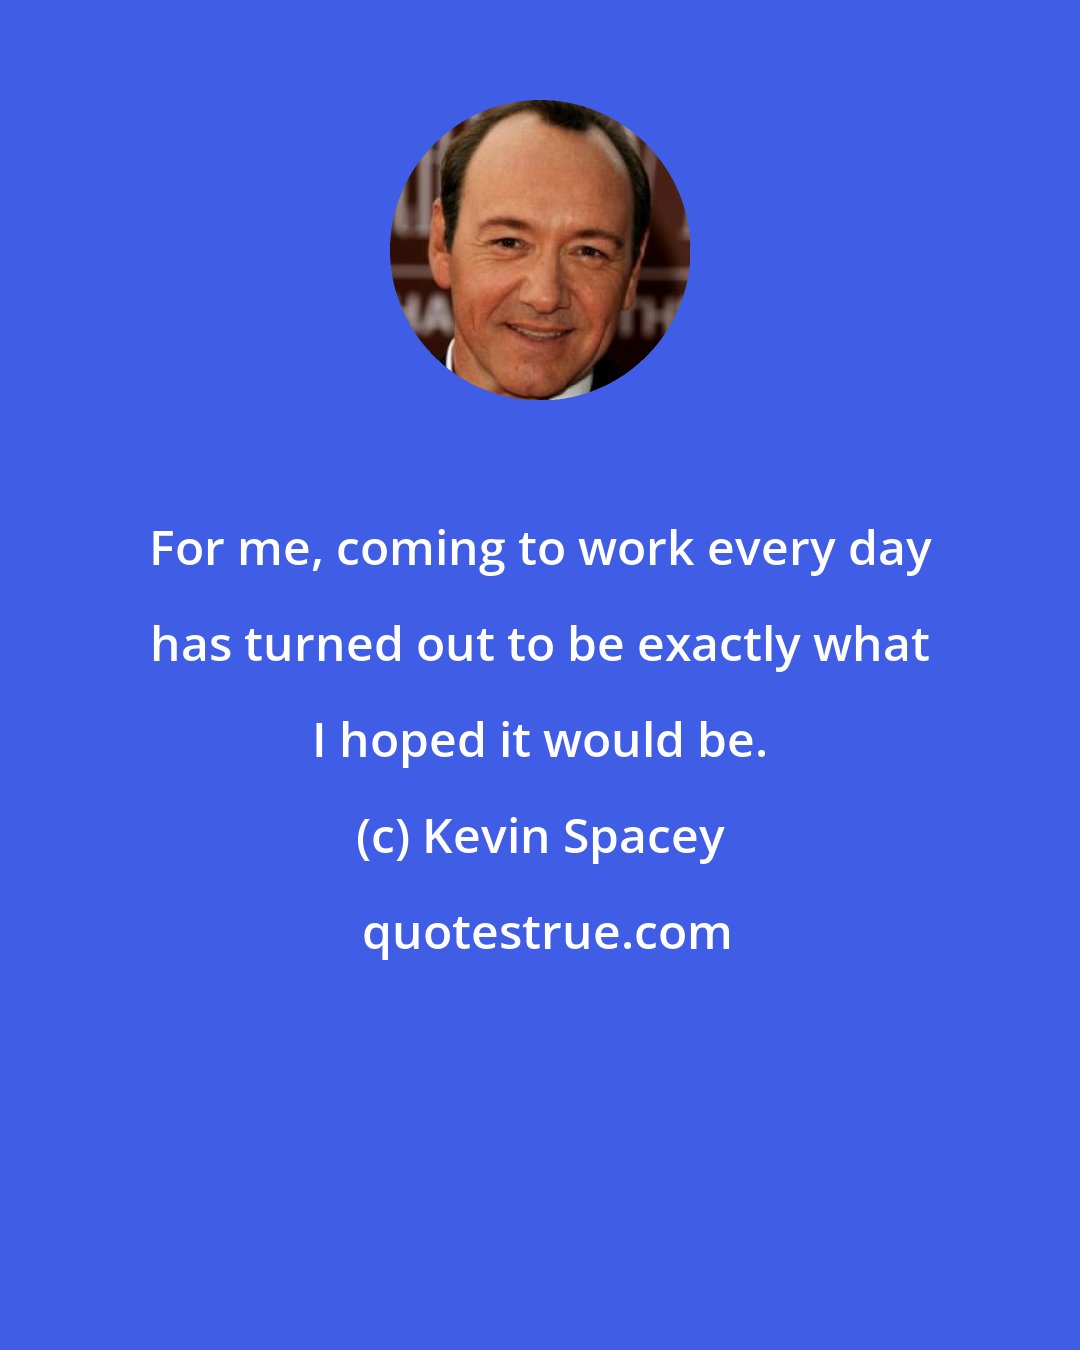 Kevin Spacey: For me, coming to work every day has turned out to be exactly what I hoped it would be.